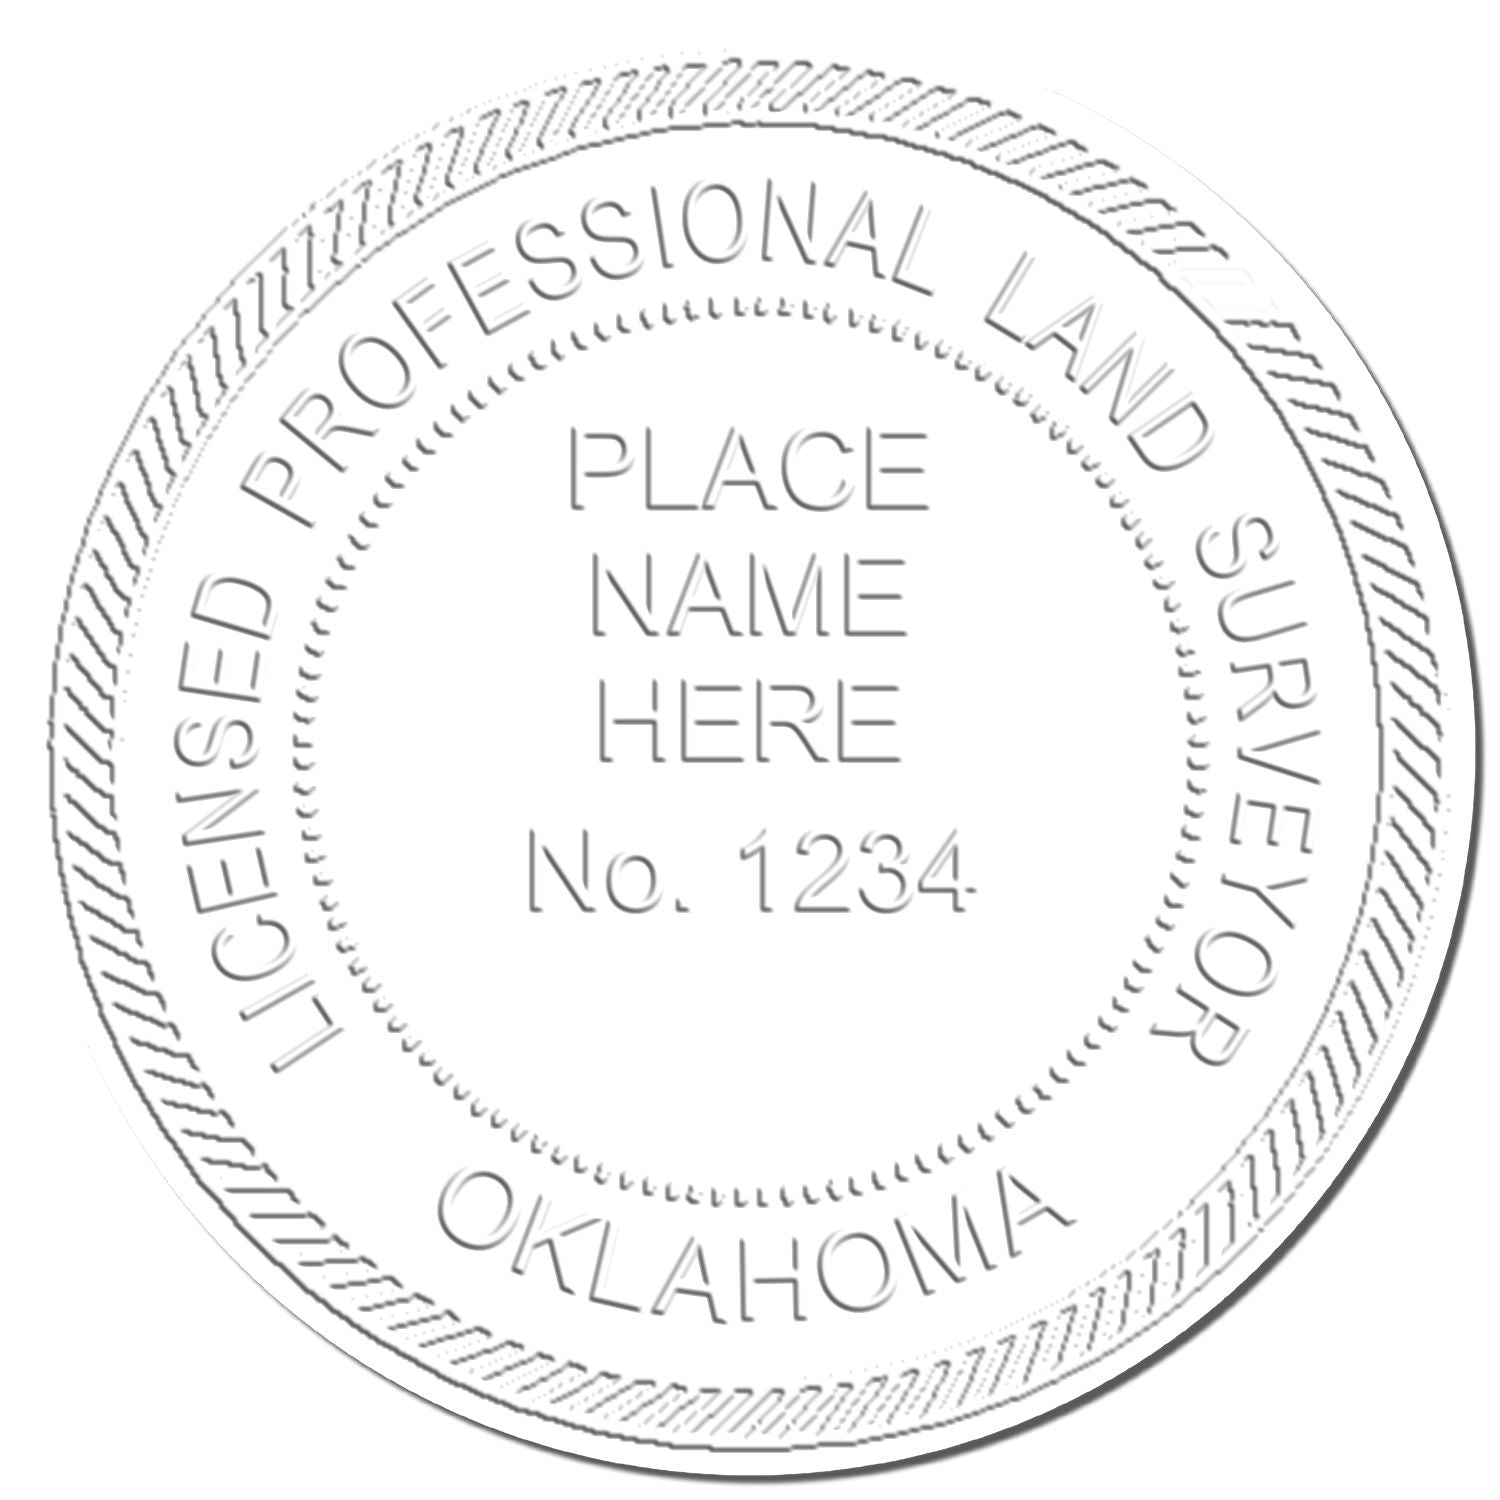 This paper is stamped with a sample imprint of the Handheld Oklahoma Land Surveyor Seal, signifying its quality and reliability.